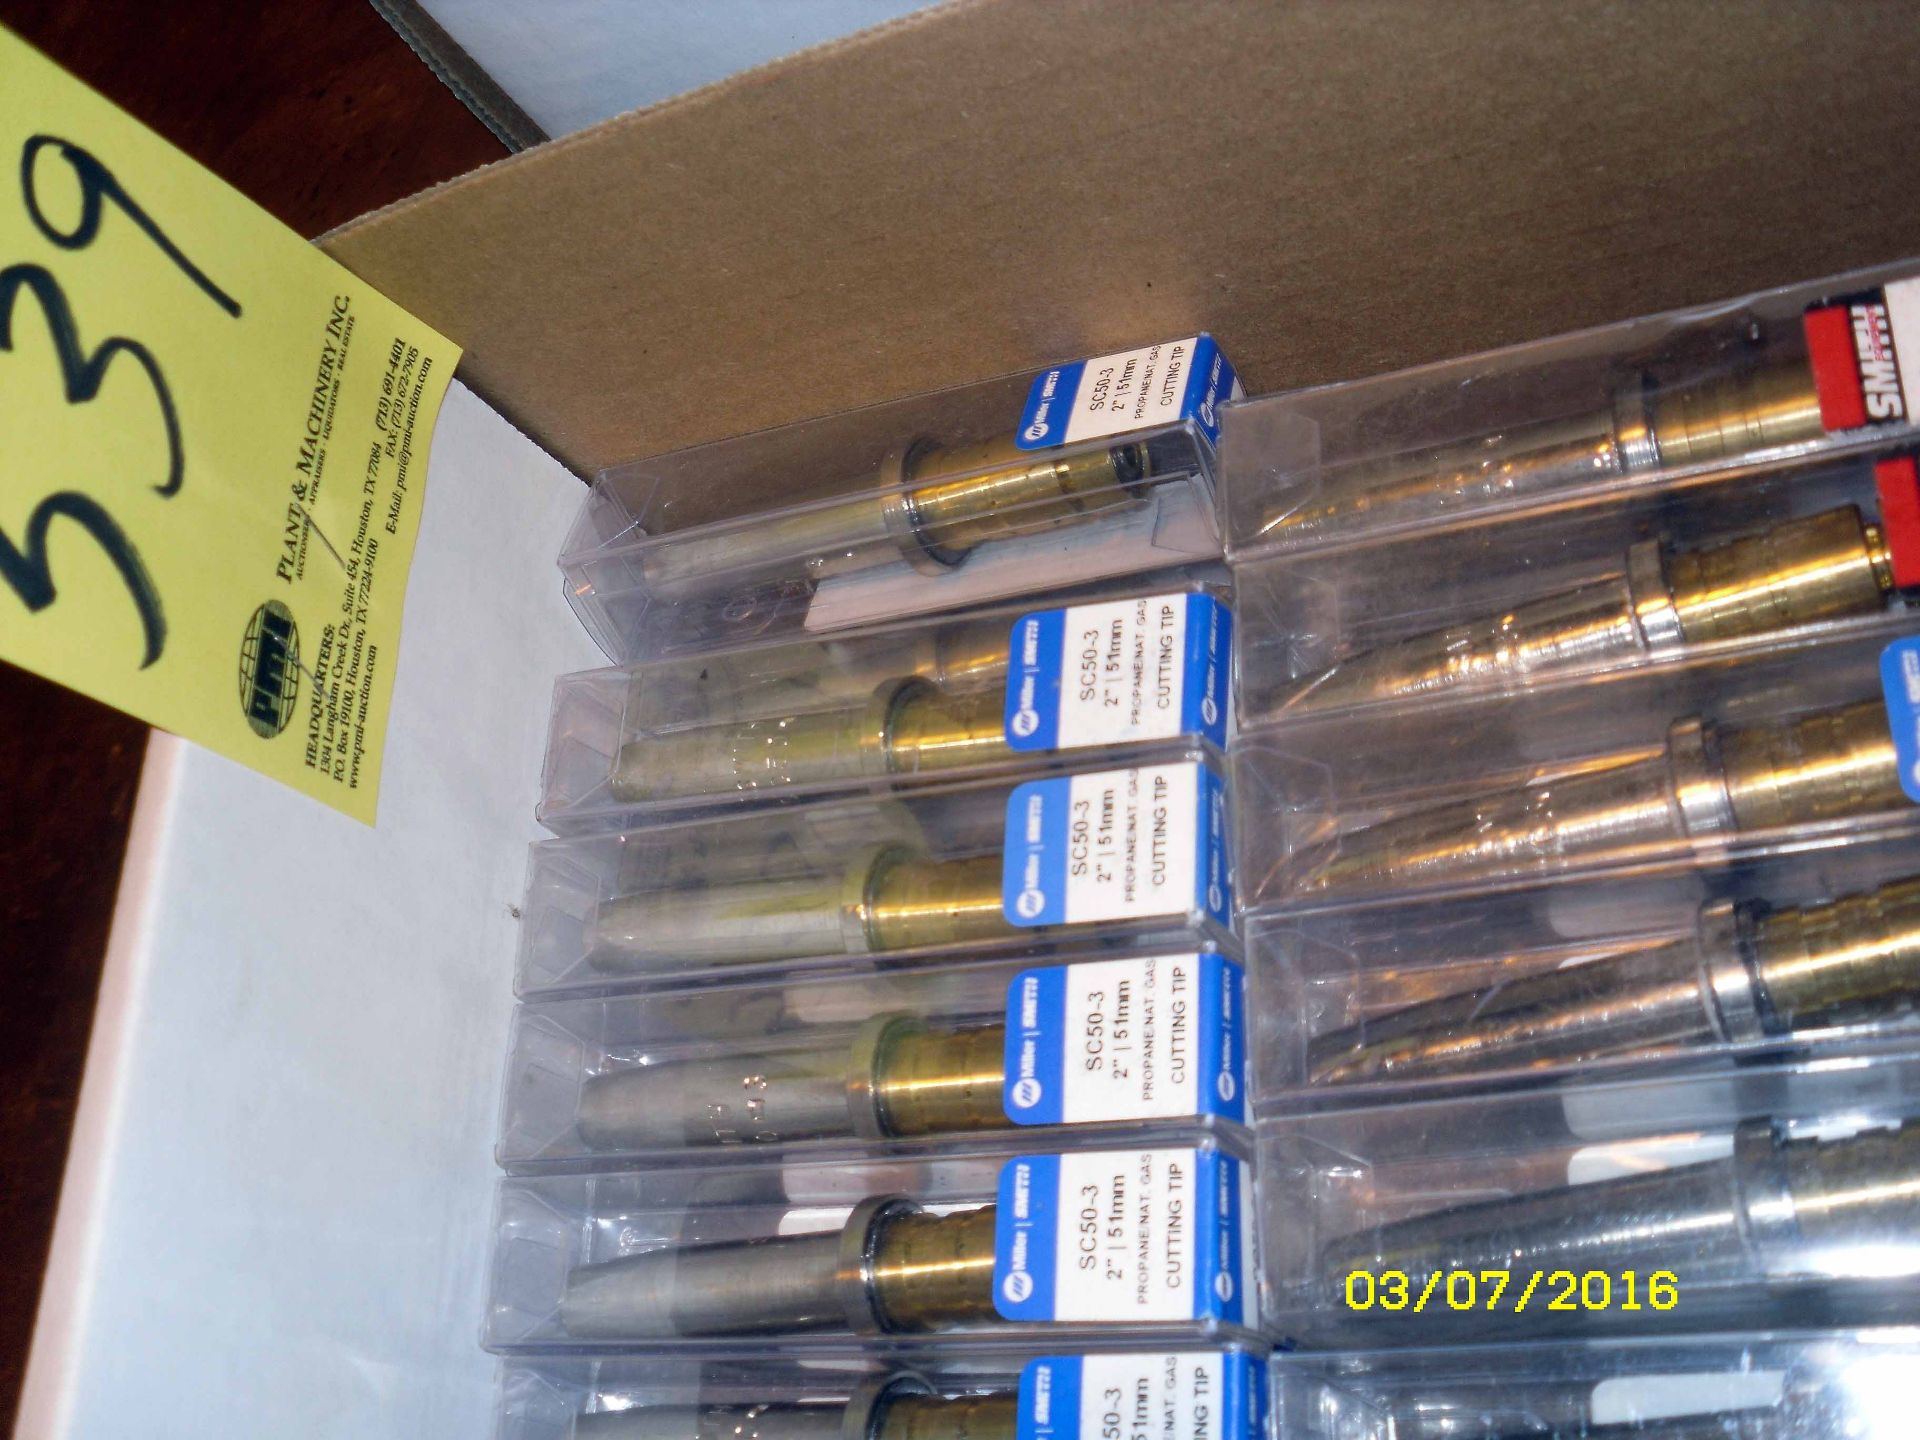 LOT OF LARGE 2-PIECE PROPANE & NATURAL GAS CUTTING TIPS (approx. 30 - in one box)